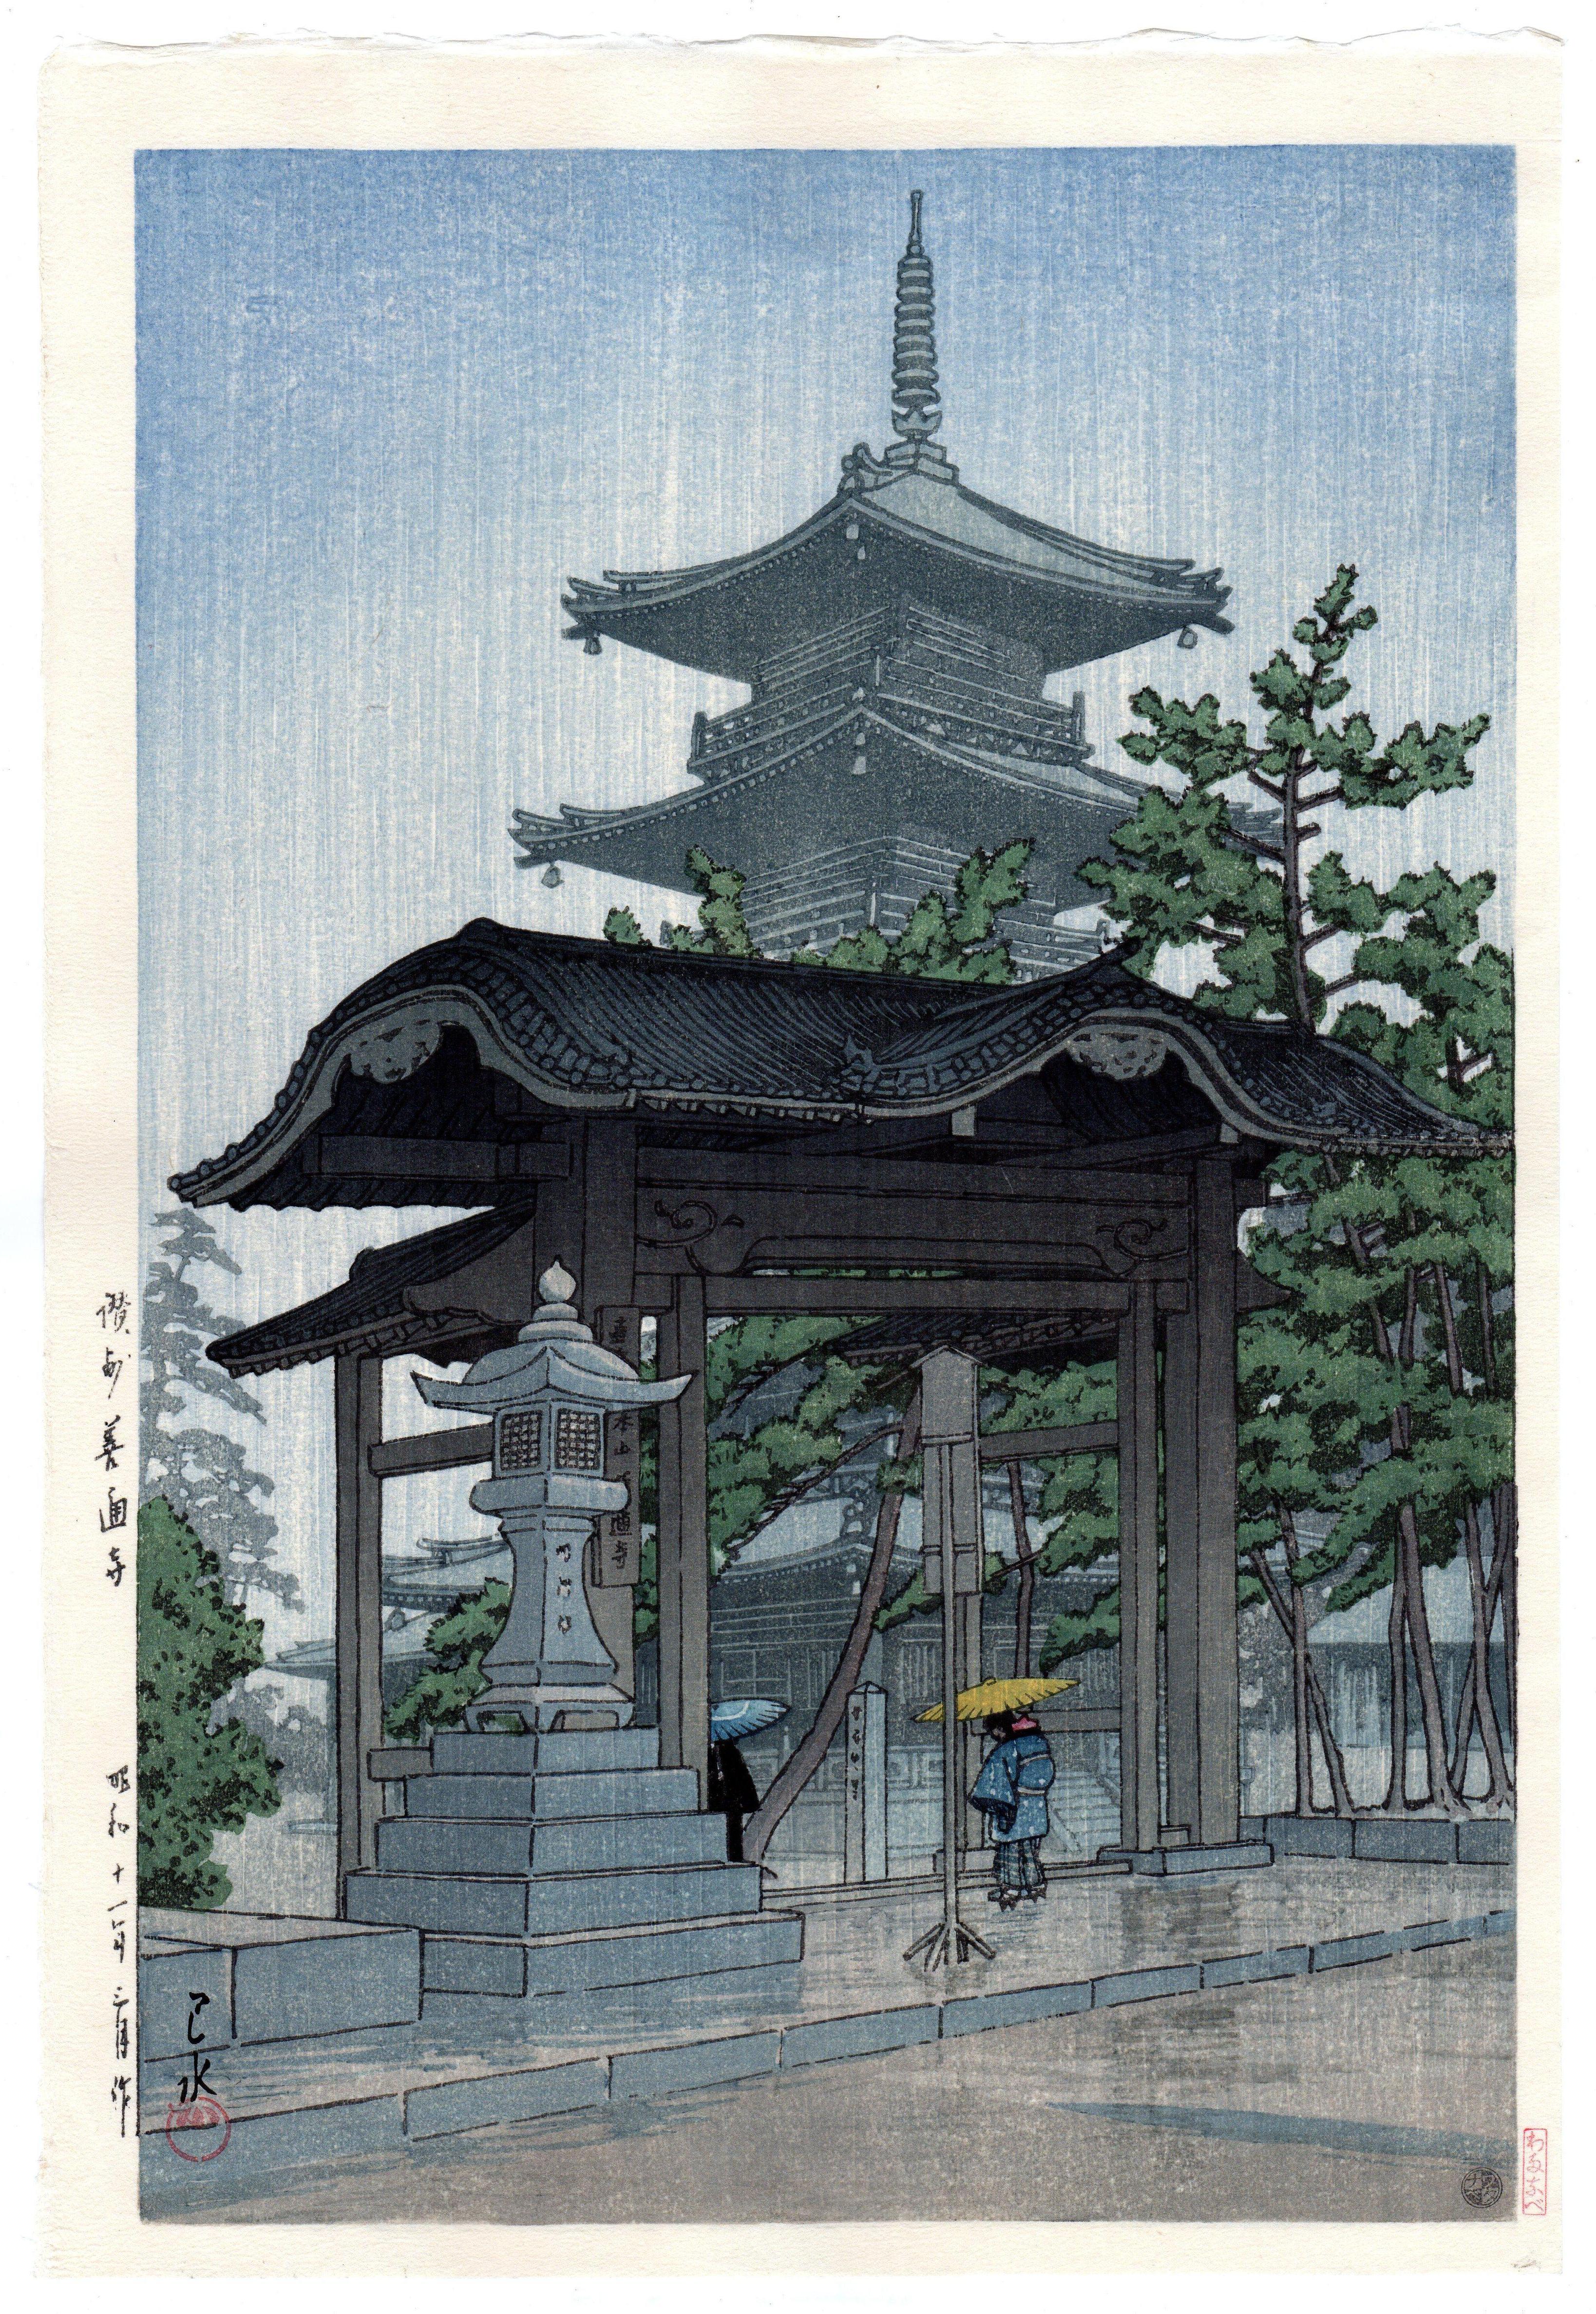 Description
Kawase Hasui - Zensetsu Temple in Sanshu, woodblock print, 1936, from the Collection of Scenic Views of Japan II. Kansai Edition, published by The S. Watanabe Color Print Co., with the 7mm and Heisei seals, 15.25